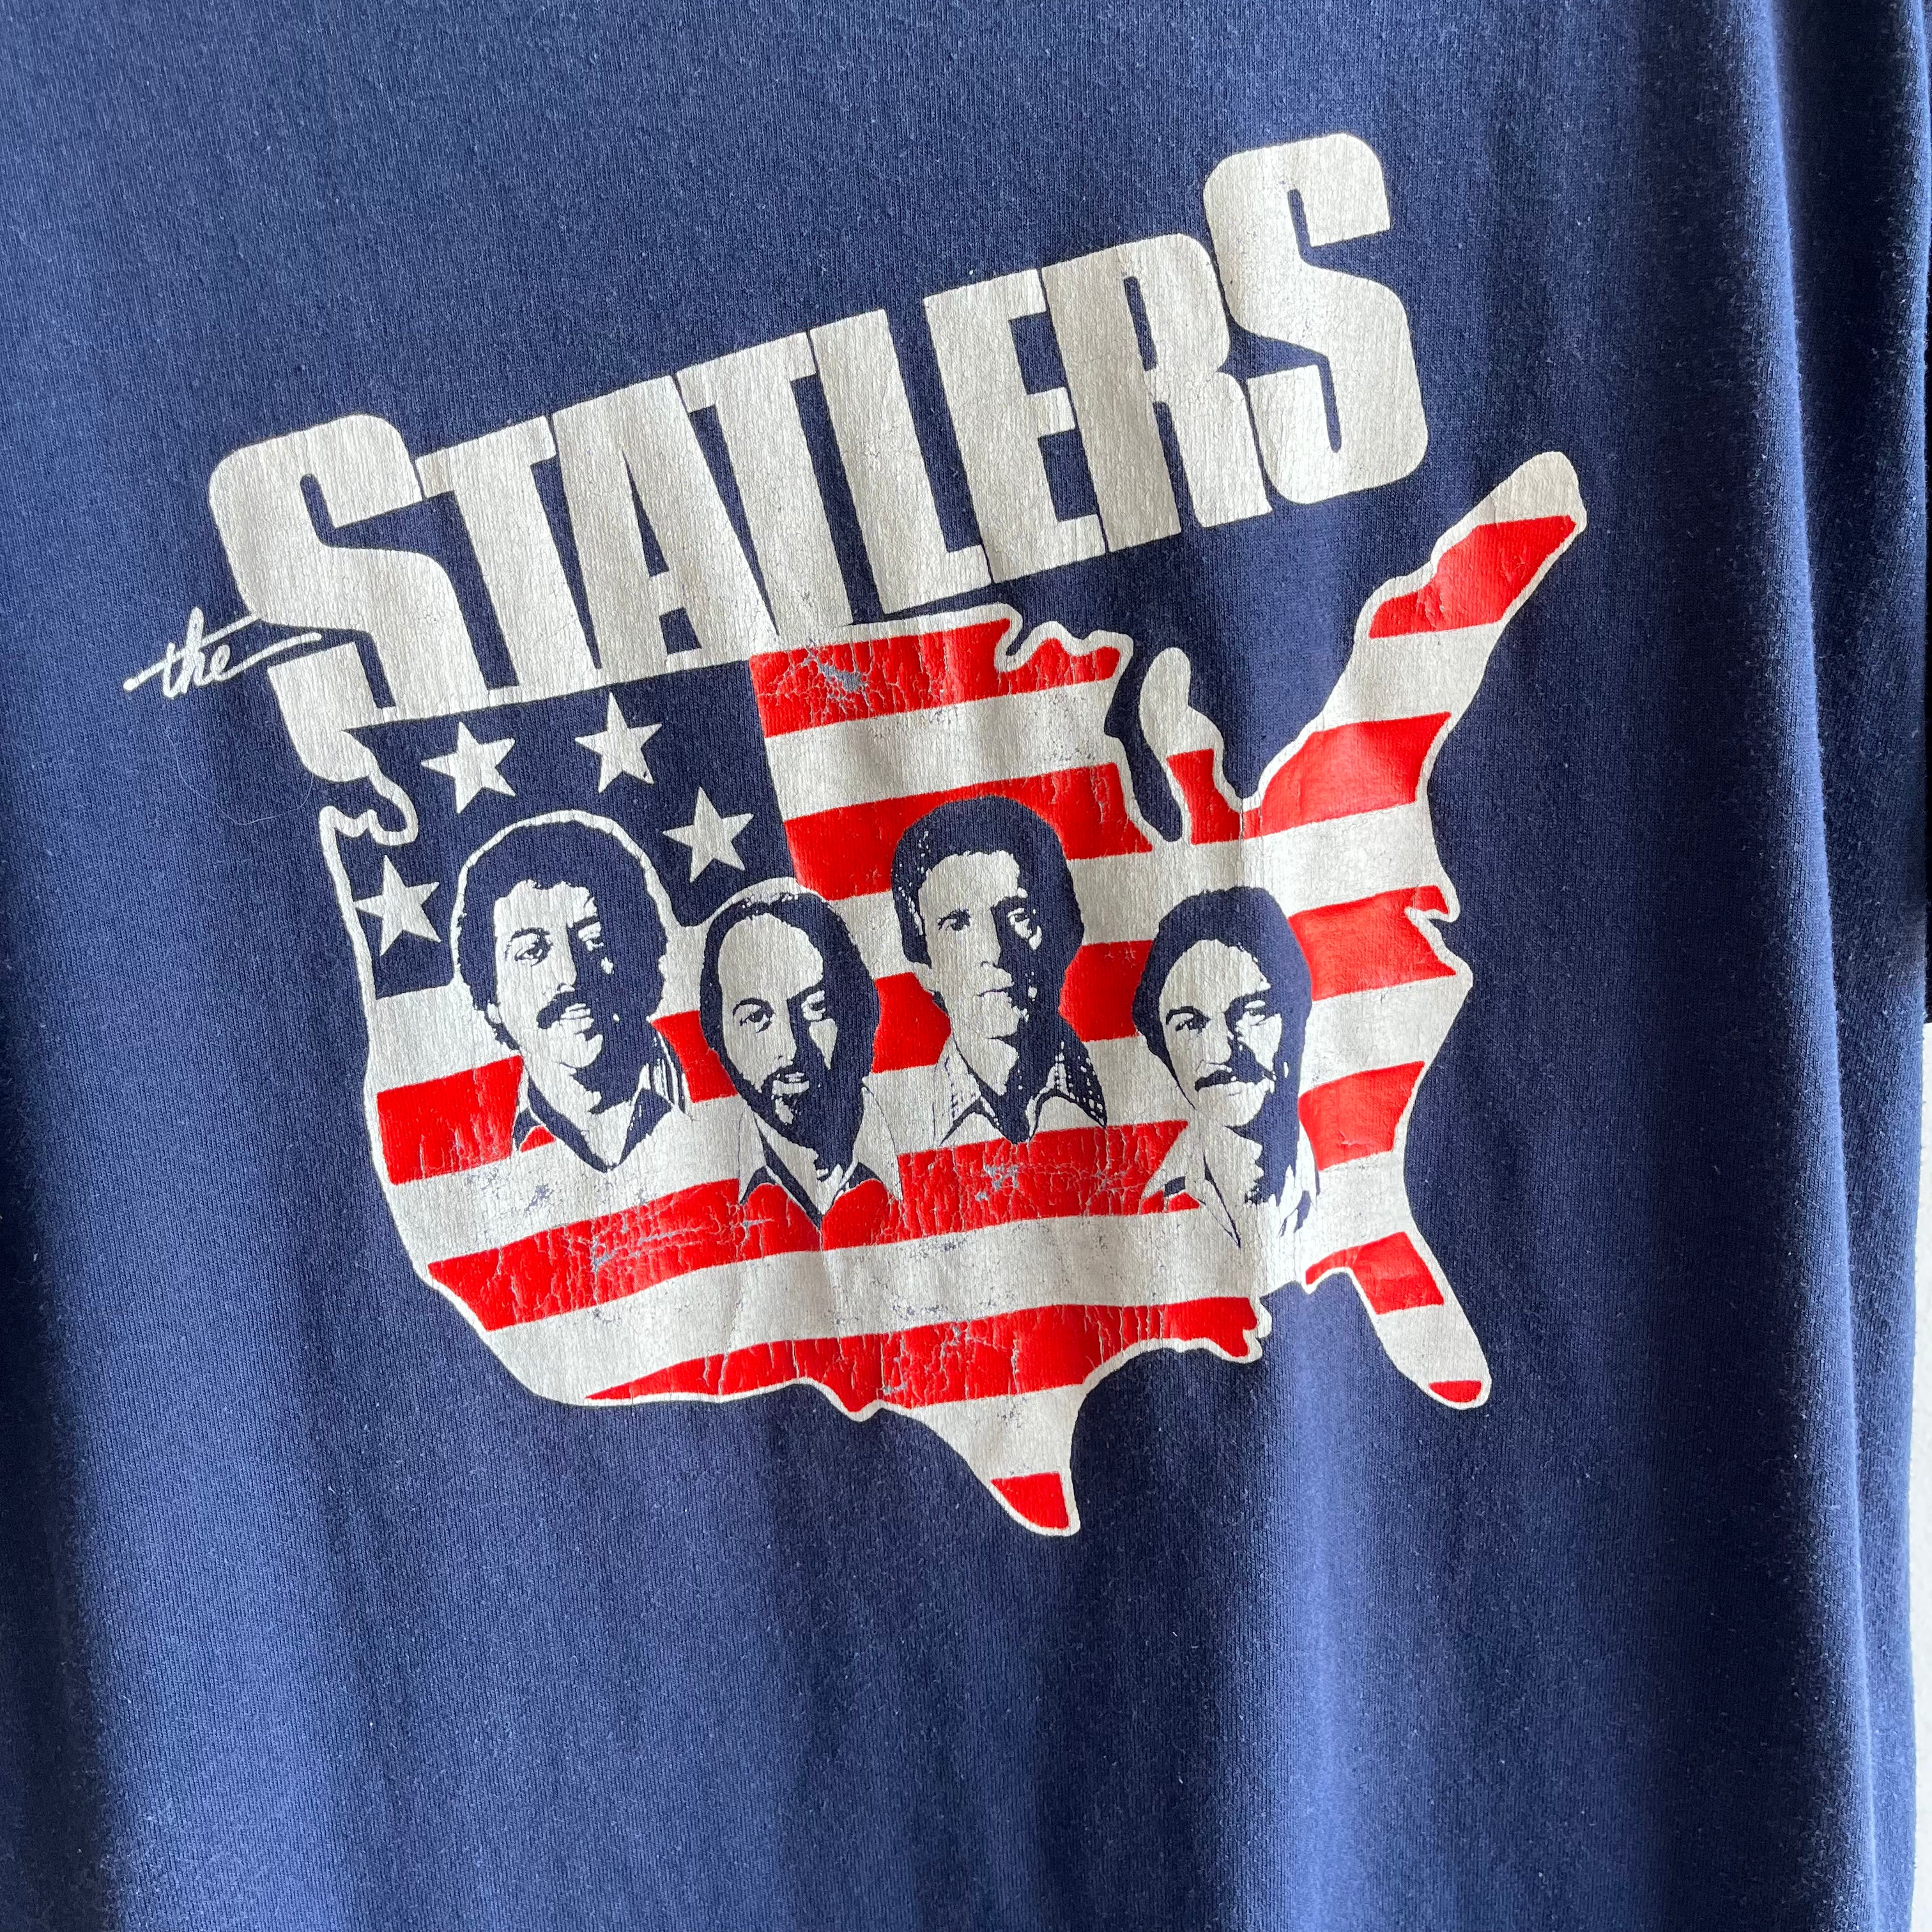 1980s The Statlers - They Opened for Johnny Cash - T-Shirt